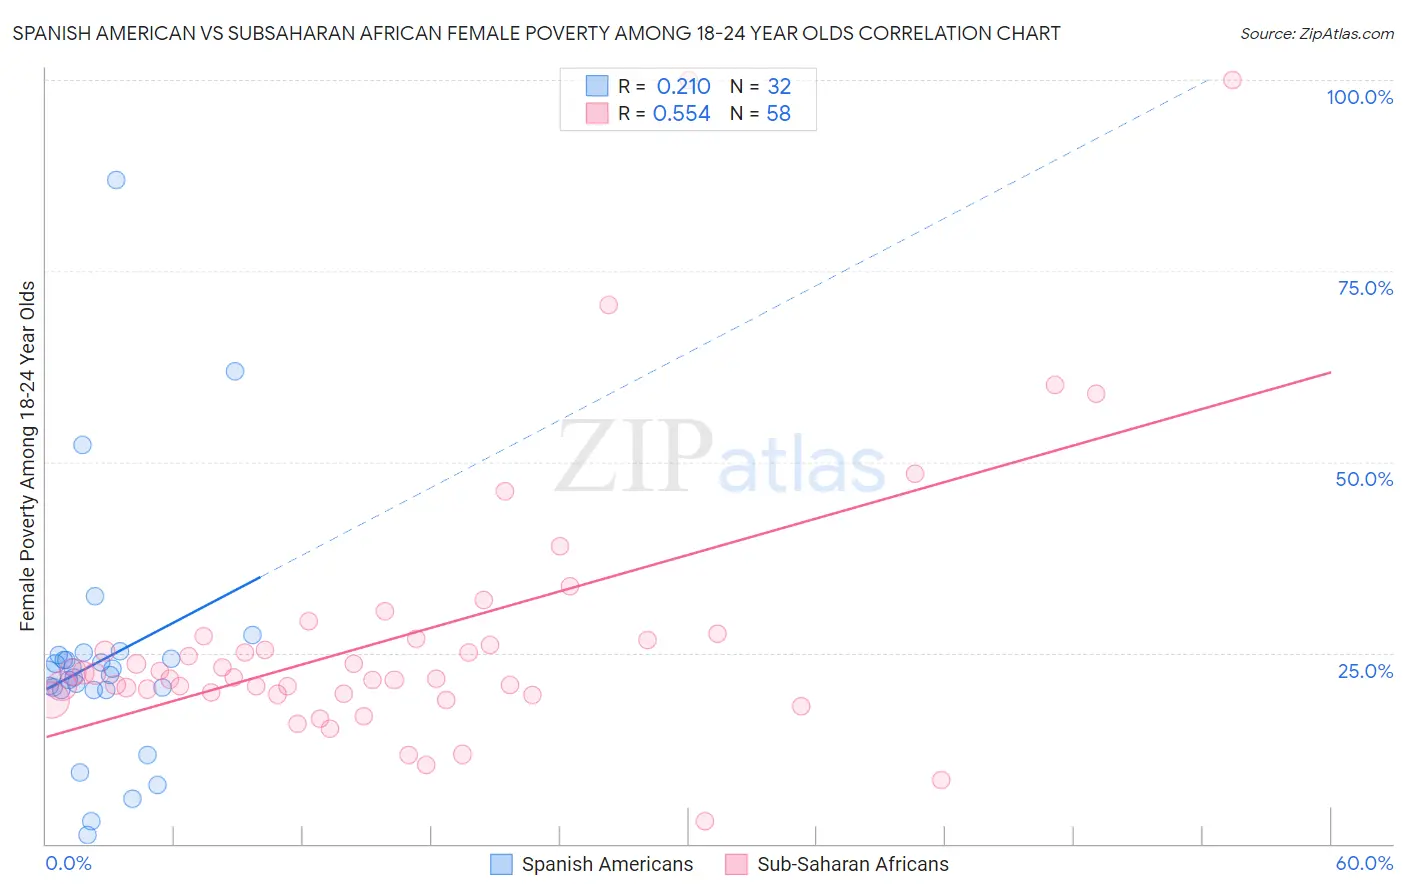 Spanish American vs Subsaharan African Female Poverty Among 18-24 Year Olds